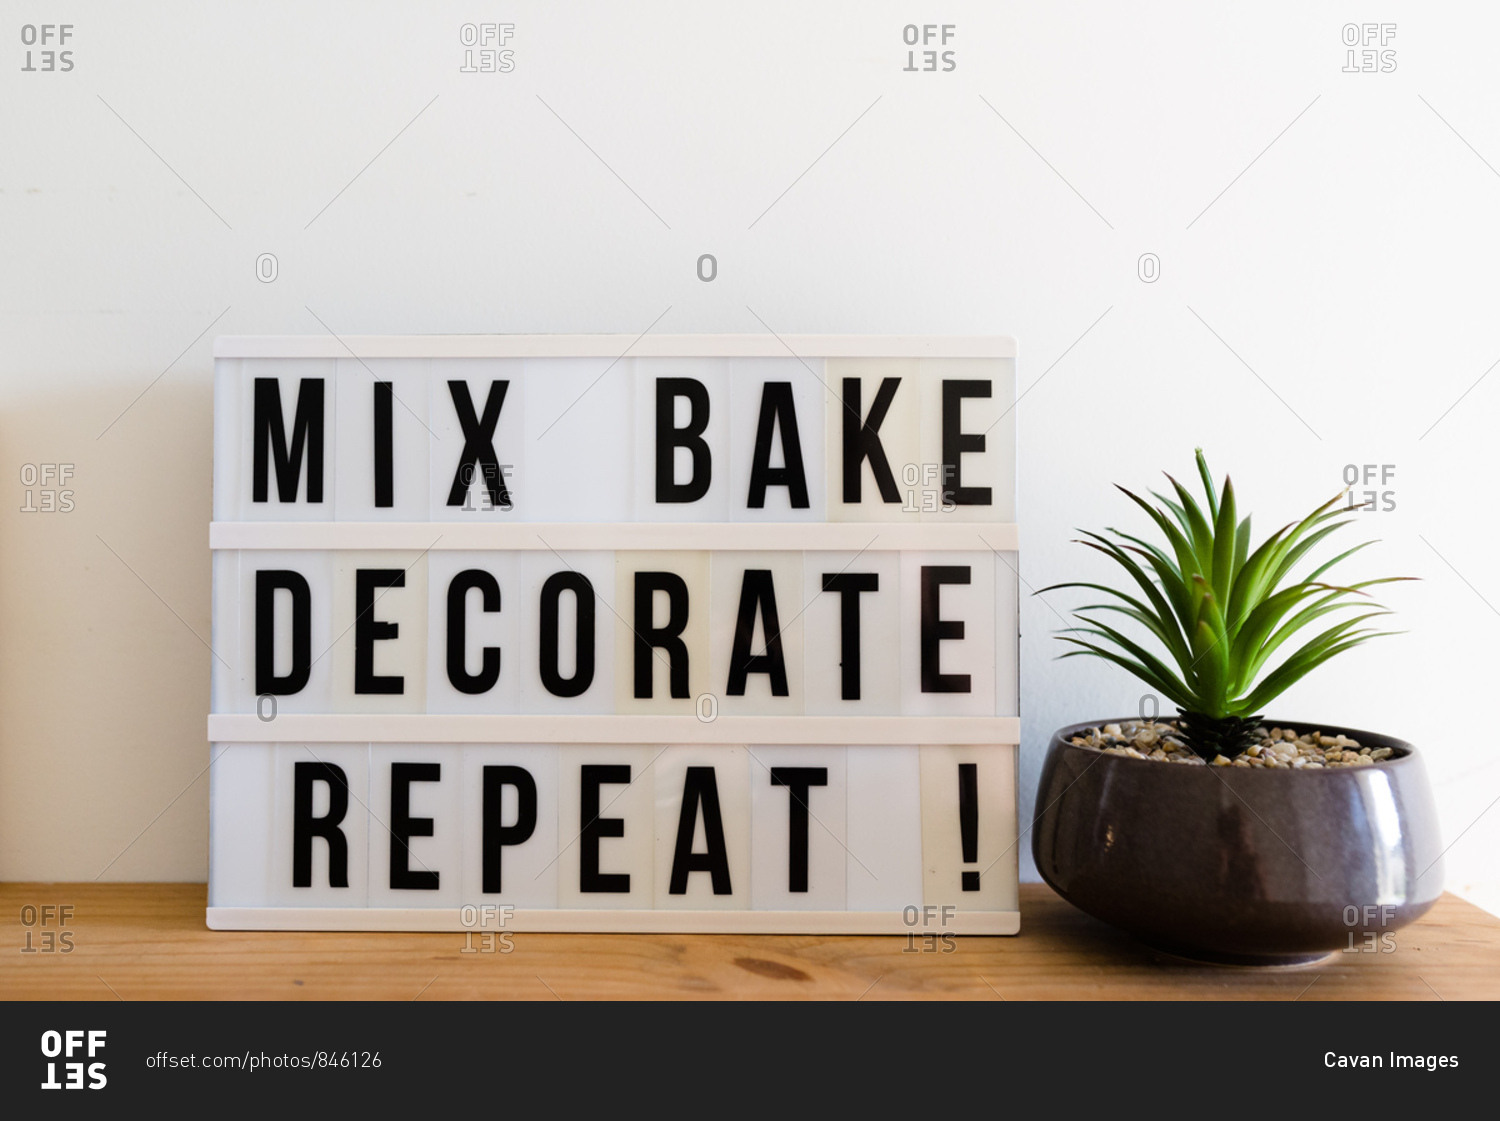 A baking sign saying \'mix, bake, decorate, repeat!\'